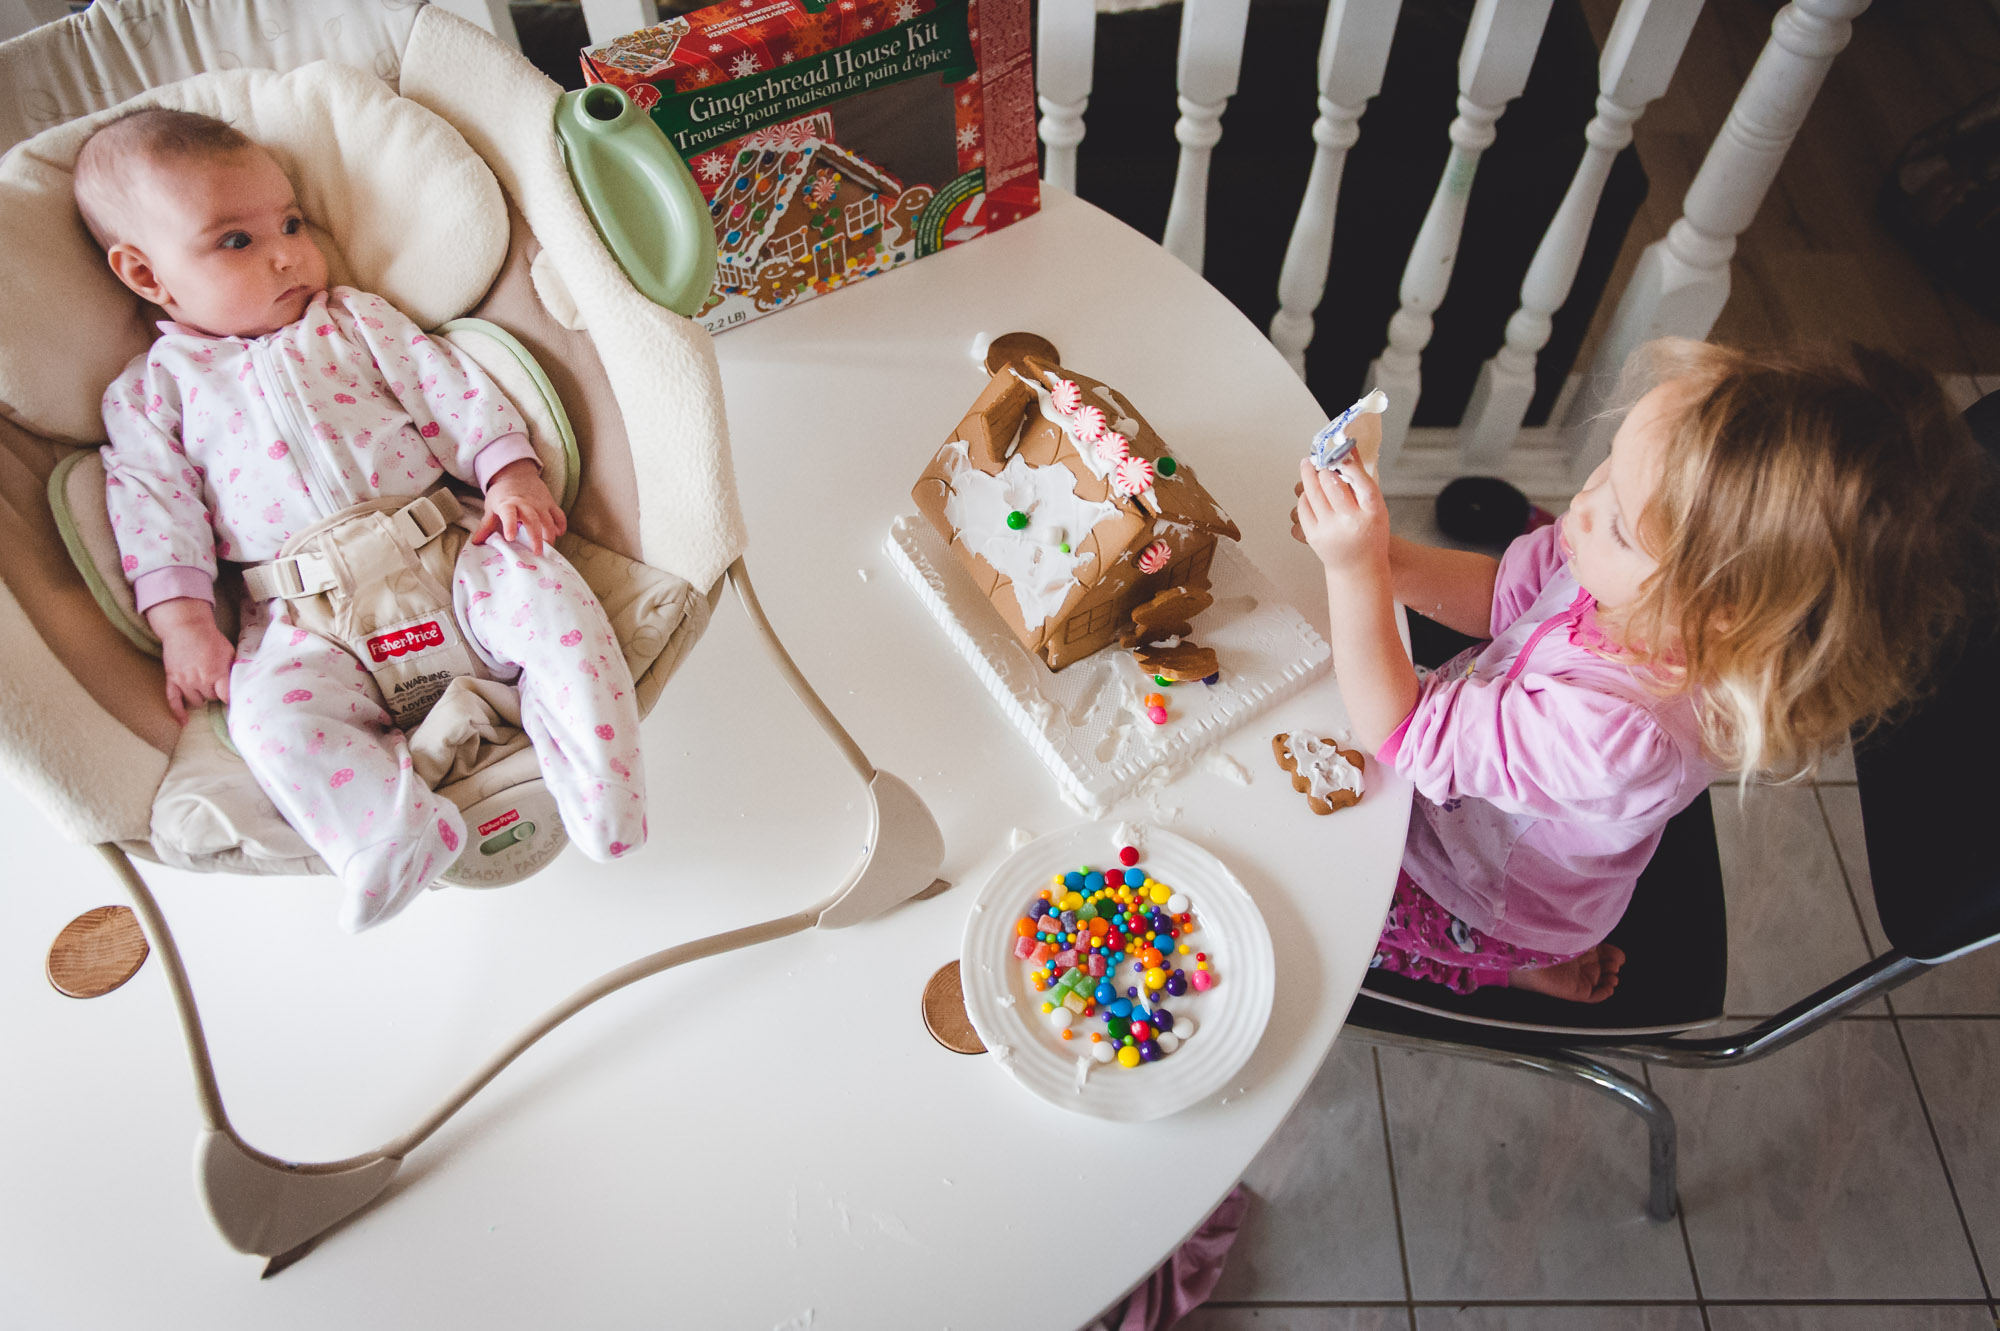 A baby sits by and watches her big sister build a gingerbread house during a documentary photo session